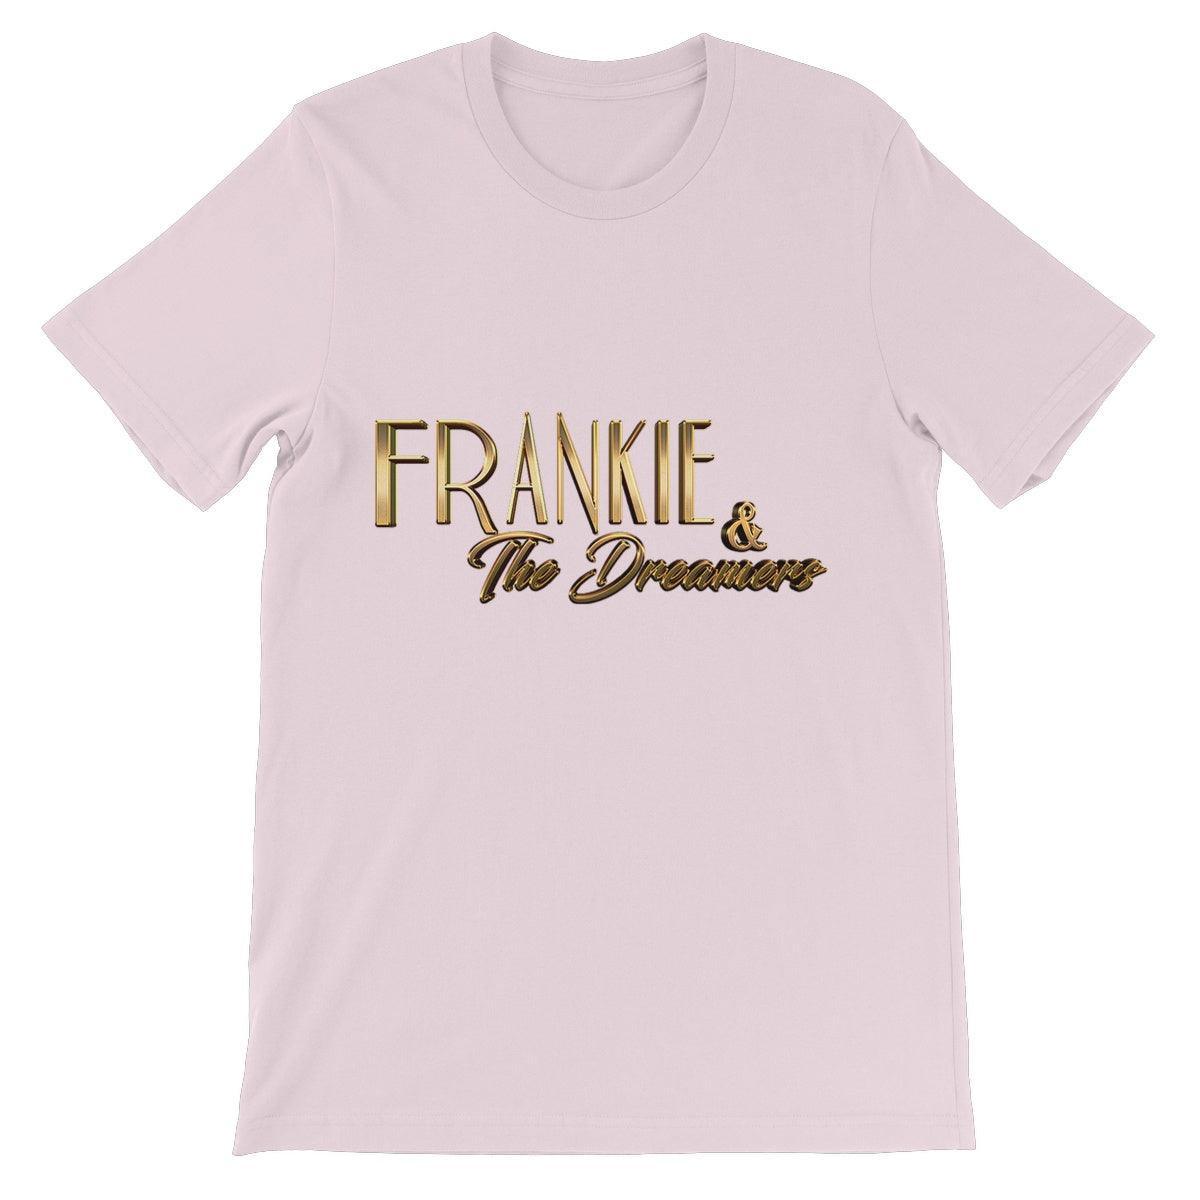 Frankie And The Dreamers Unisex Short Sleeve T-Shirt | Apparel Soft Pink